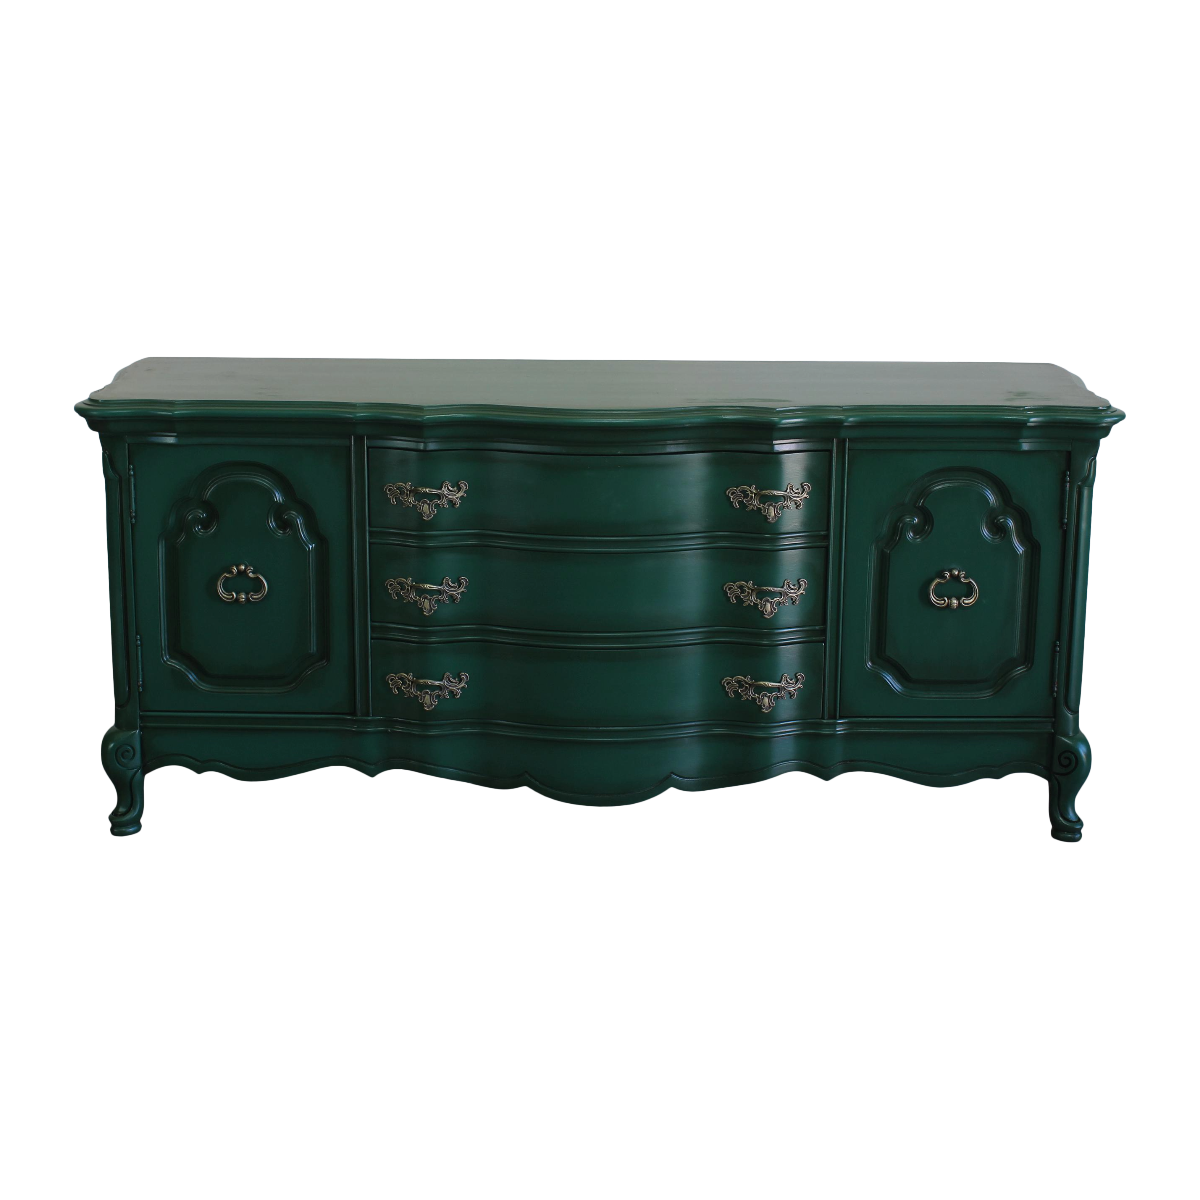 Vintage French style viridian green cabinet.  This is a solid built cabinet with a beautiful scalloped design and bentwood drawers, is  professionally refinished in a viridian green with an antique glaze finish.  Dimensions; 72" Width x 17" Depth x 28" Heigh